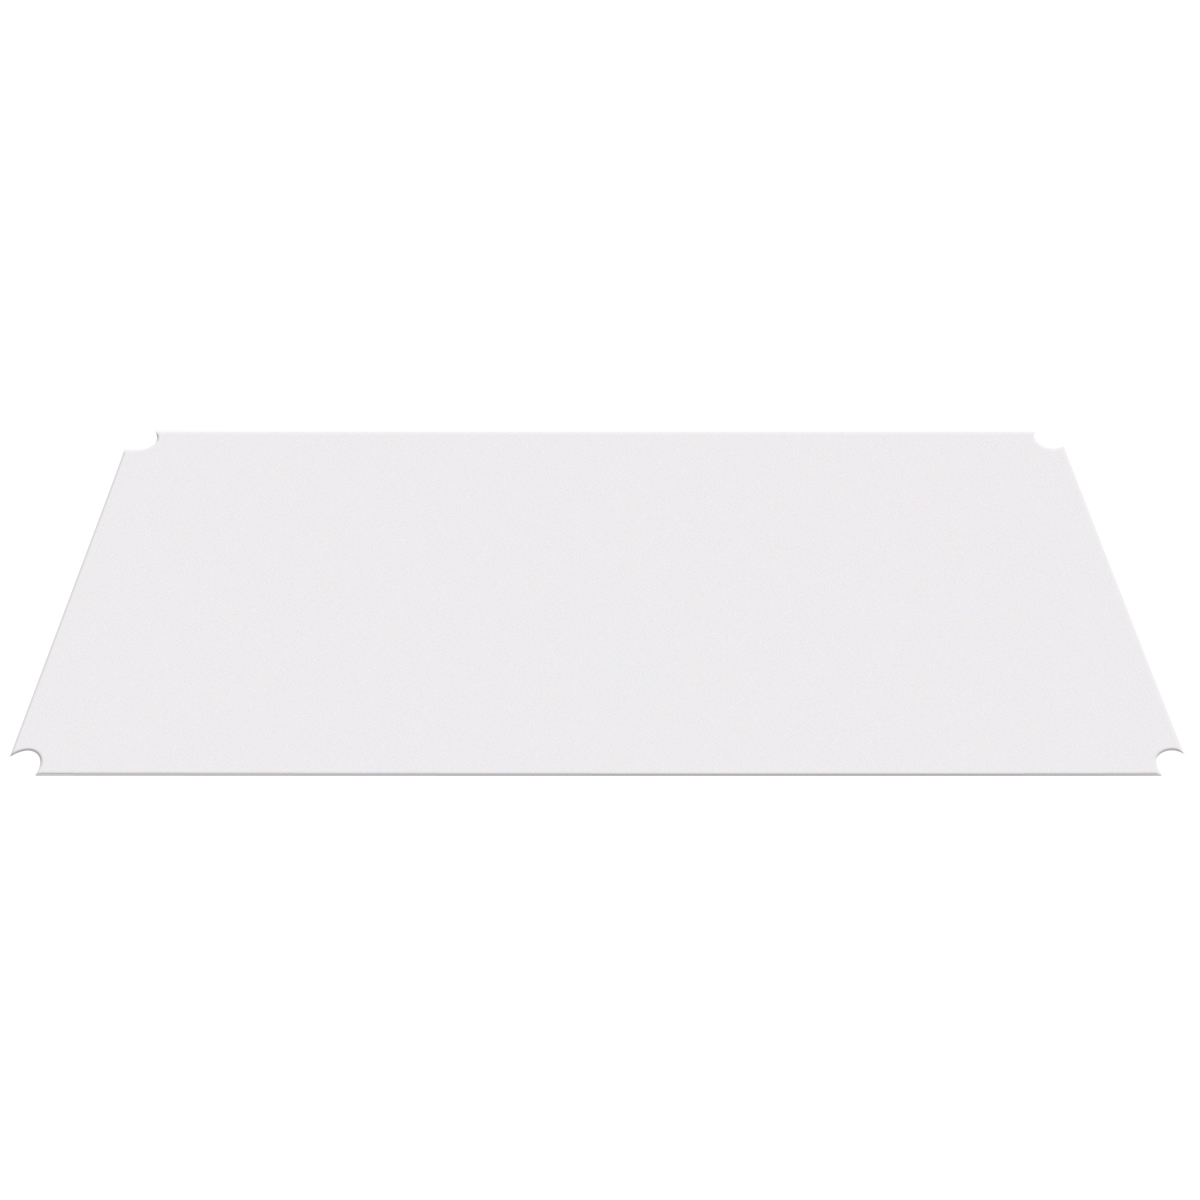 Clear Shelf Liner for 18-inch X 48-inch Chrome Wire Shelf Pack of 4 AKRO-MILS  AW1848LINER 